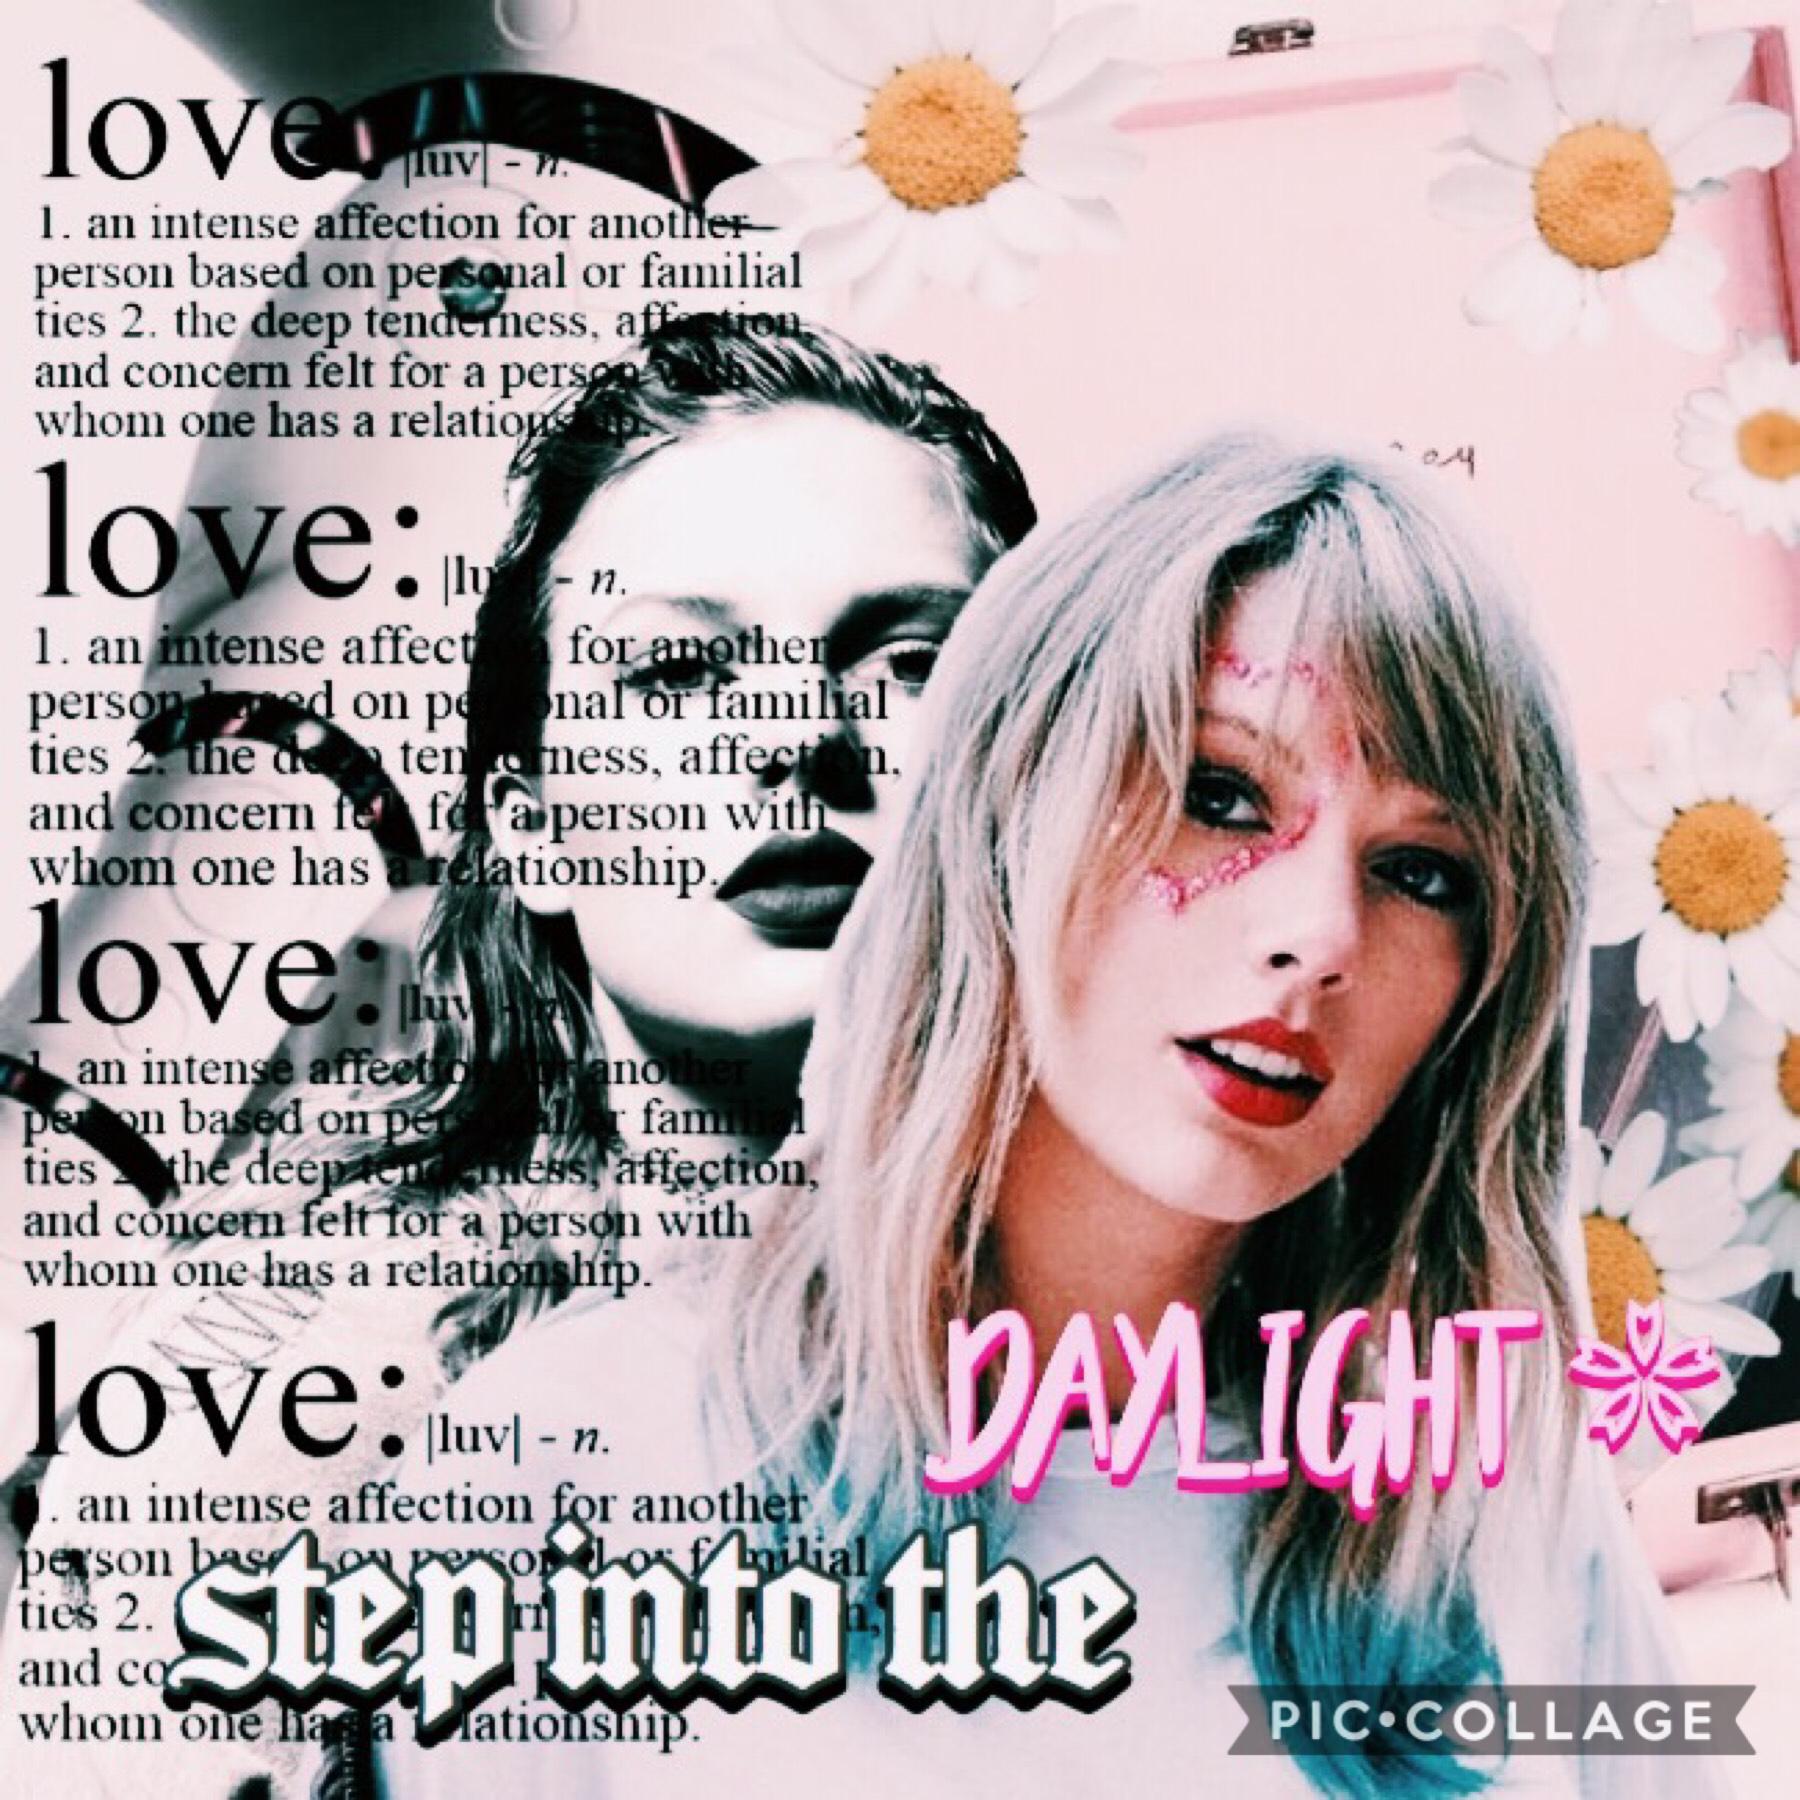 track 18. daylight.
step into the daylight and let it go